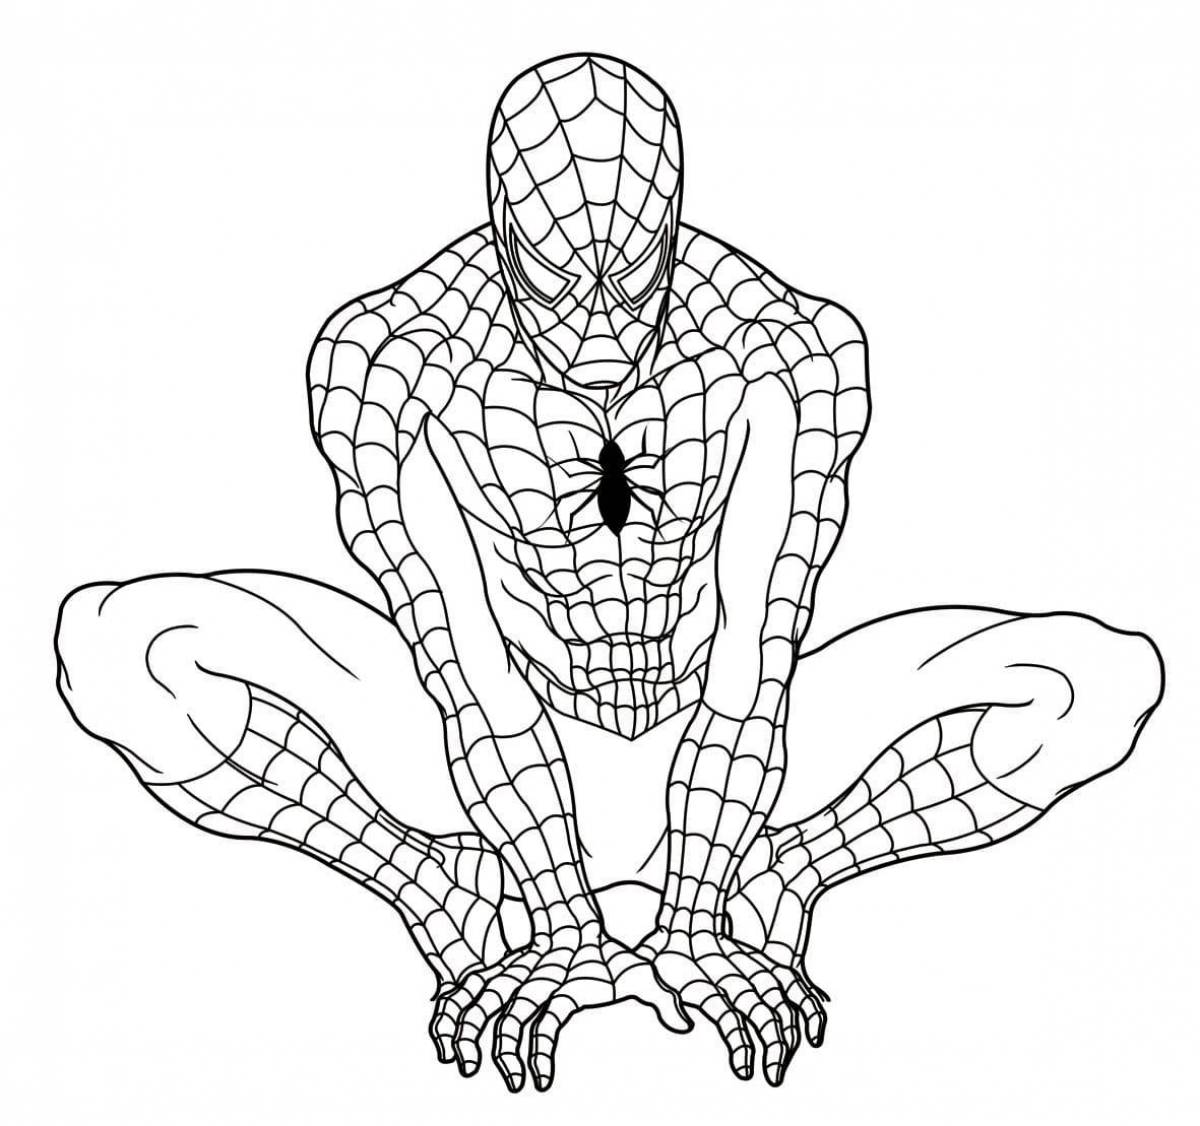 Spiderman's richly detailed coloring page